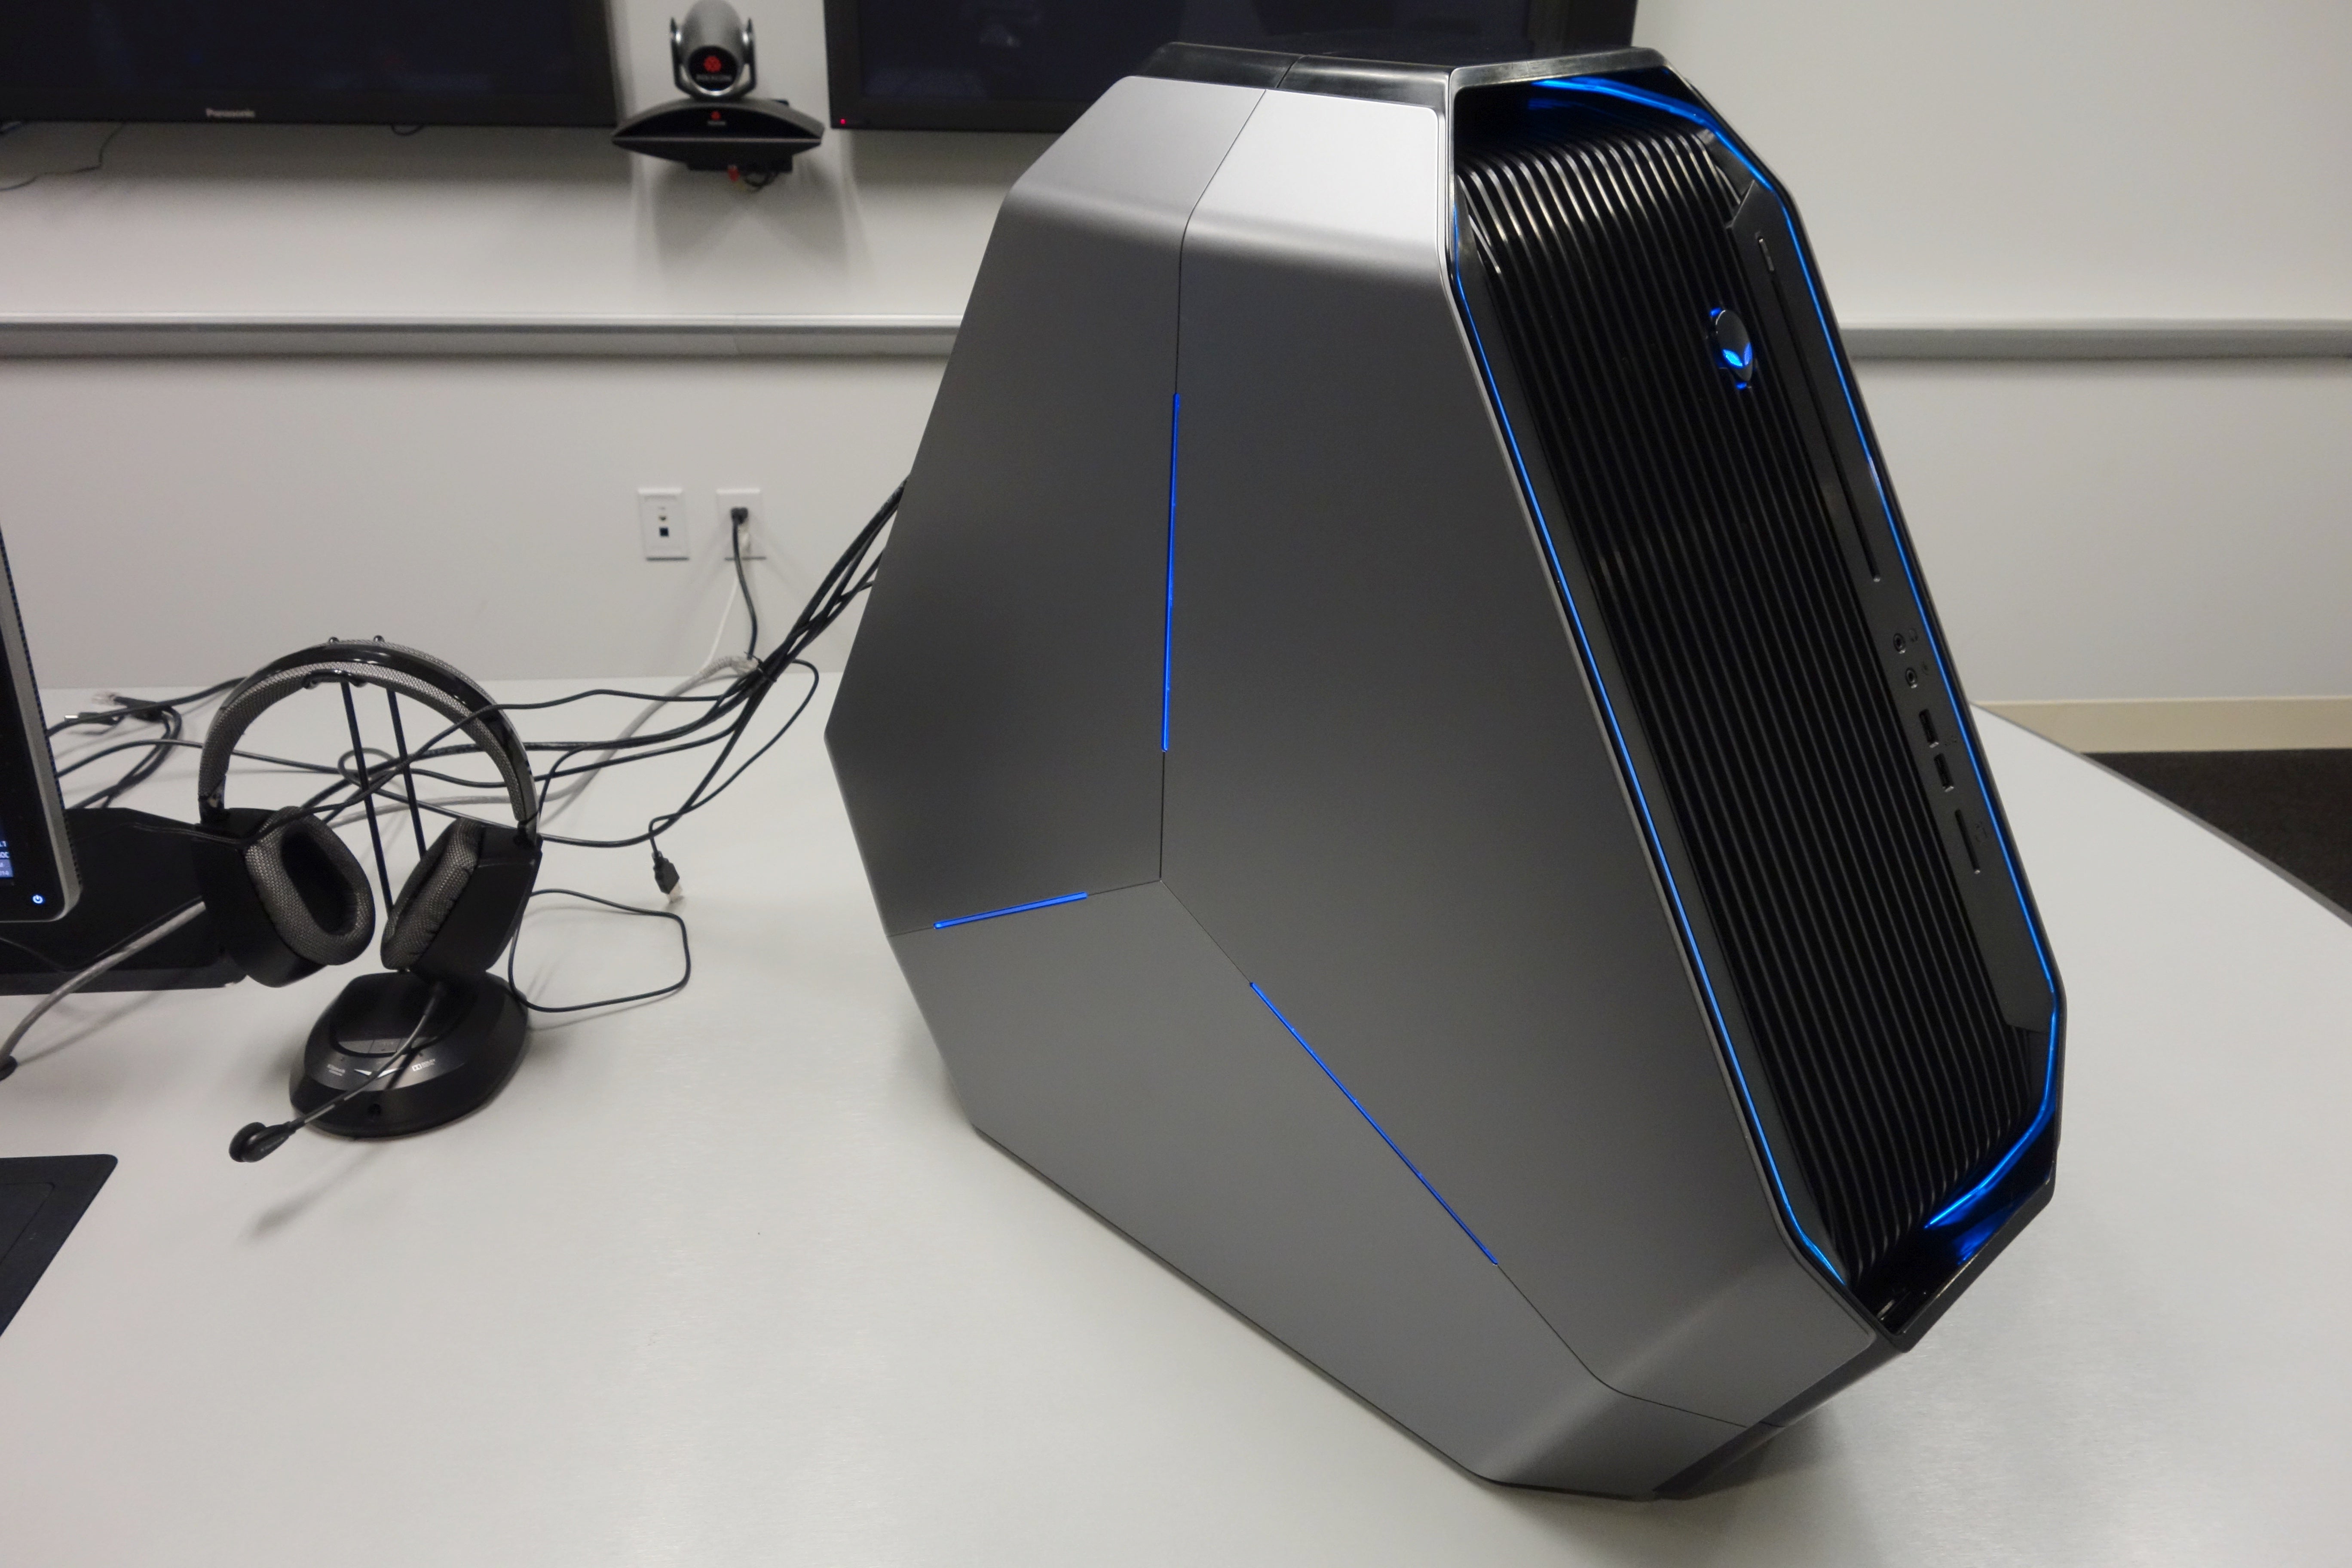 The New Alienware Area51 Is The Weirdest Gaming PC I've Ever Seen